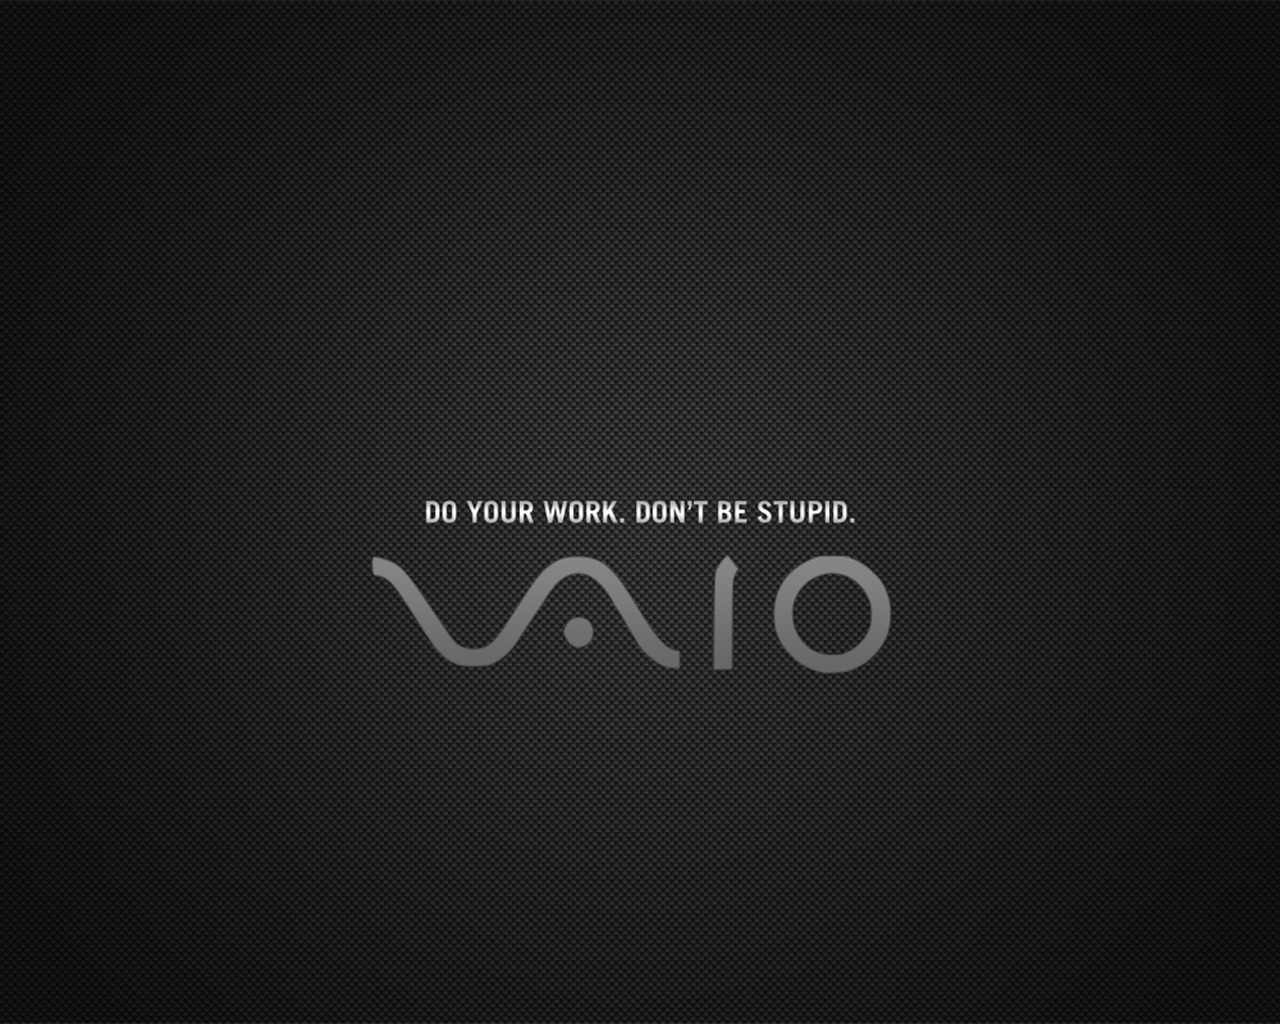 Vaio Wallpaper Sony Vaio Computers Wallpapers In Jpg Format For Free Download